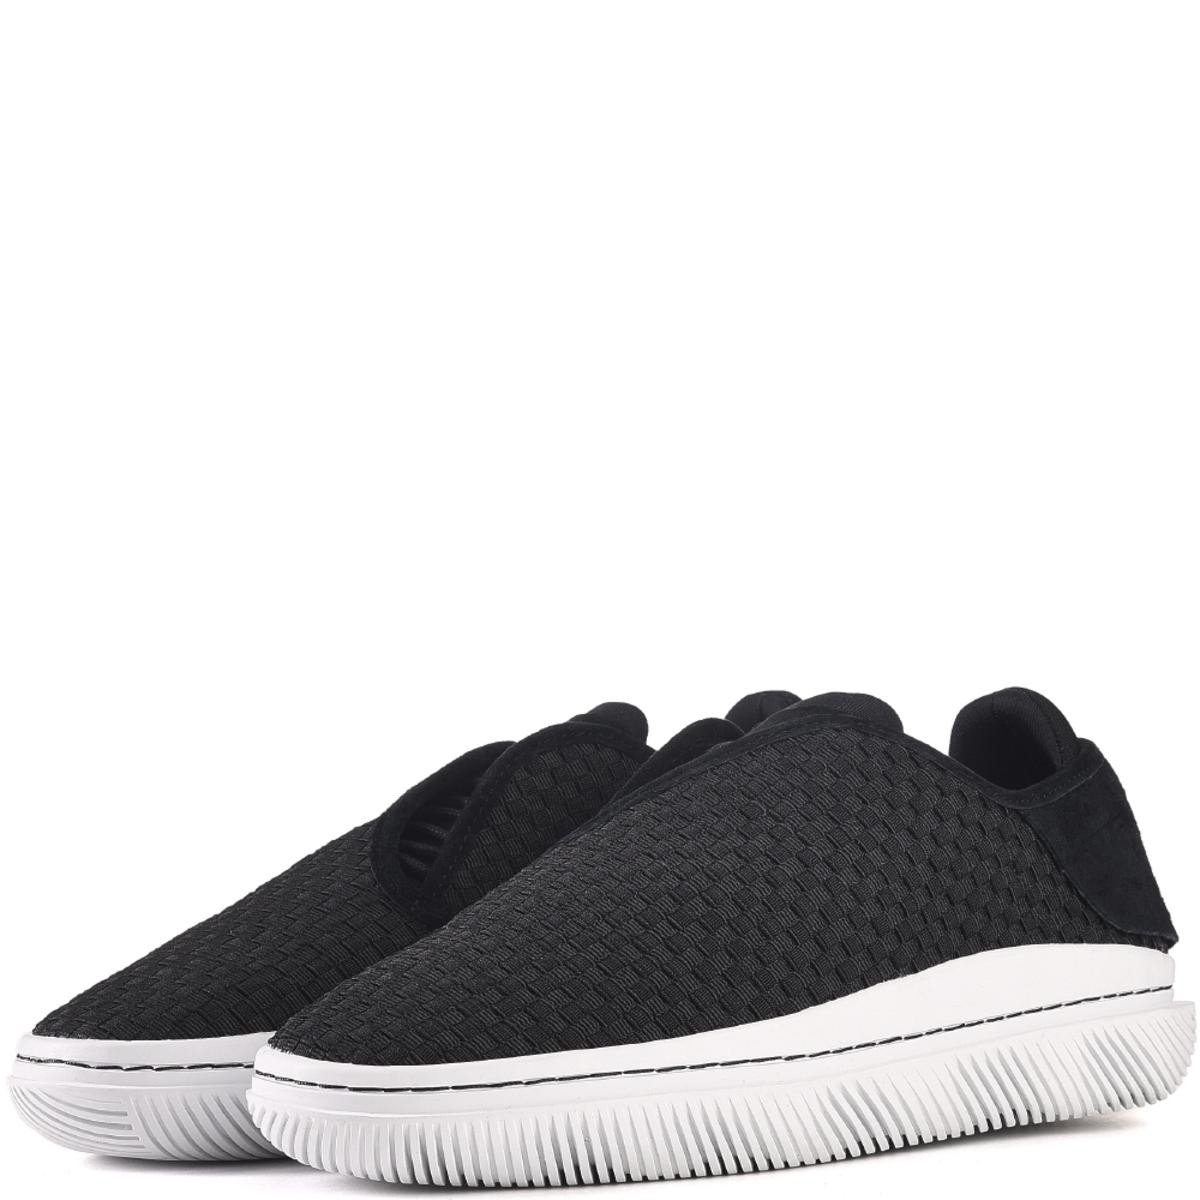 Clear Weather Unisex: Convx in Black Sneakers